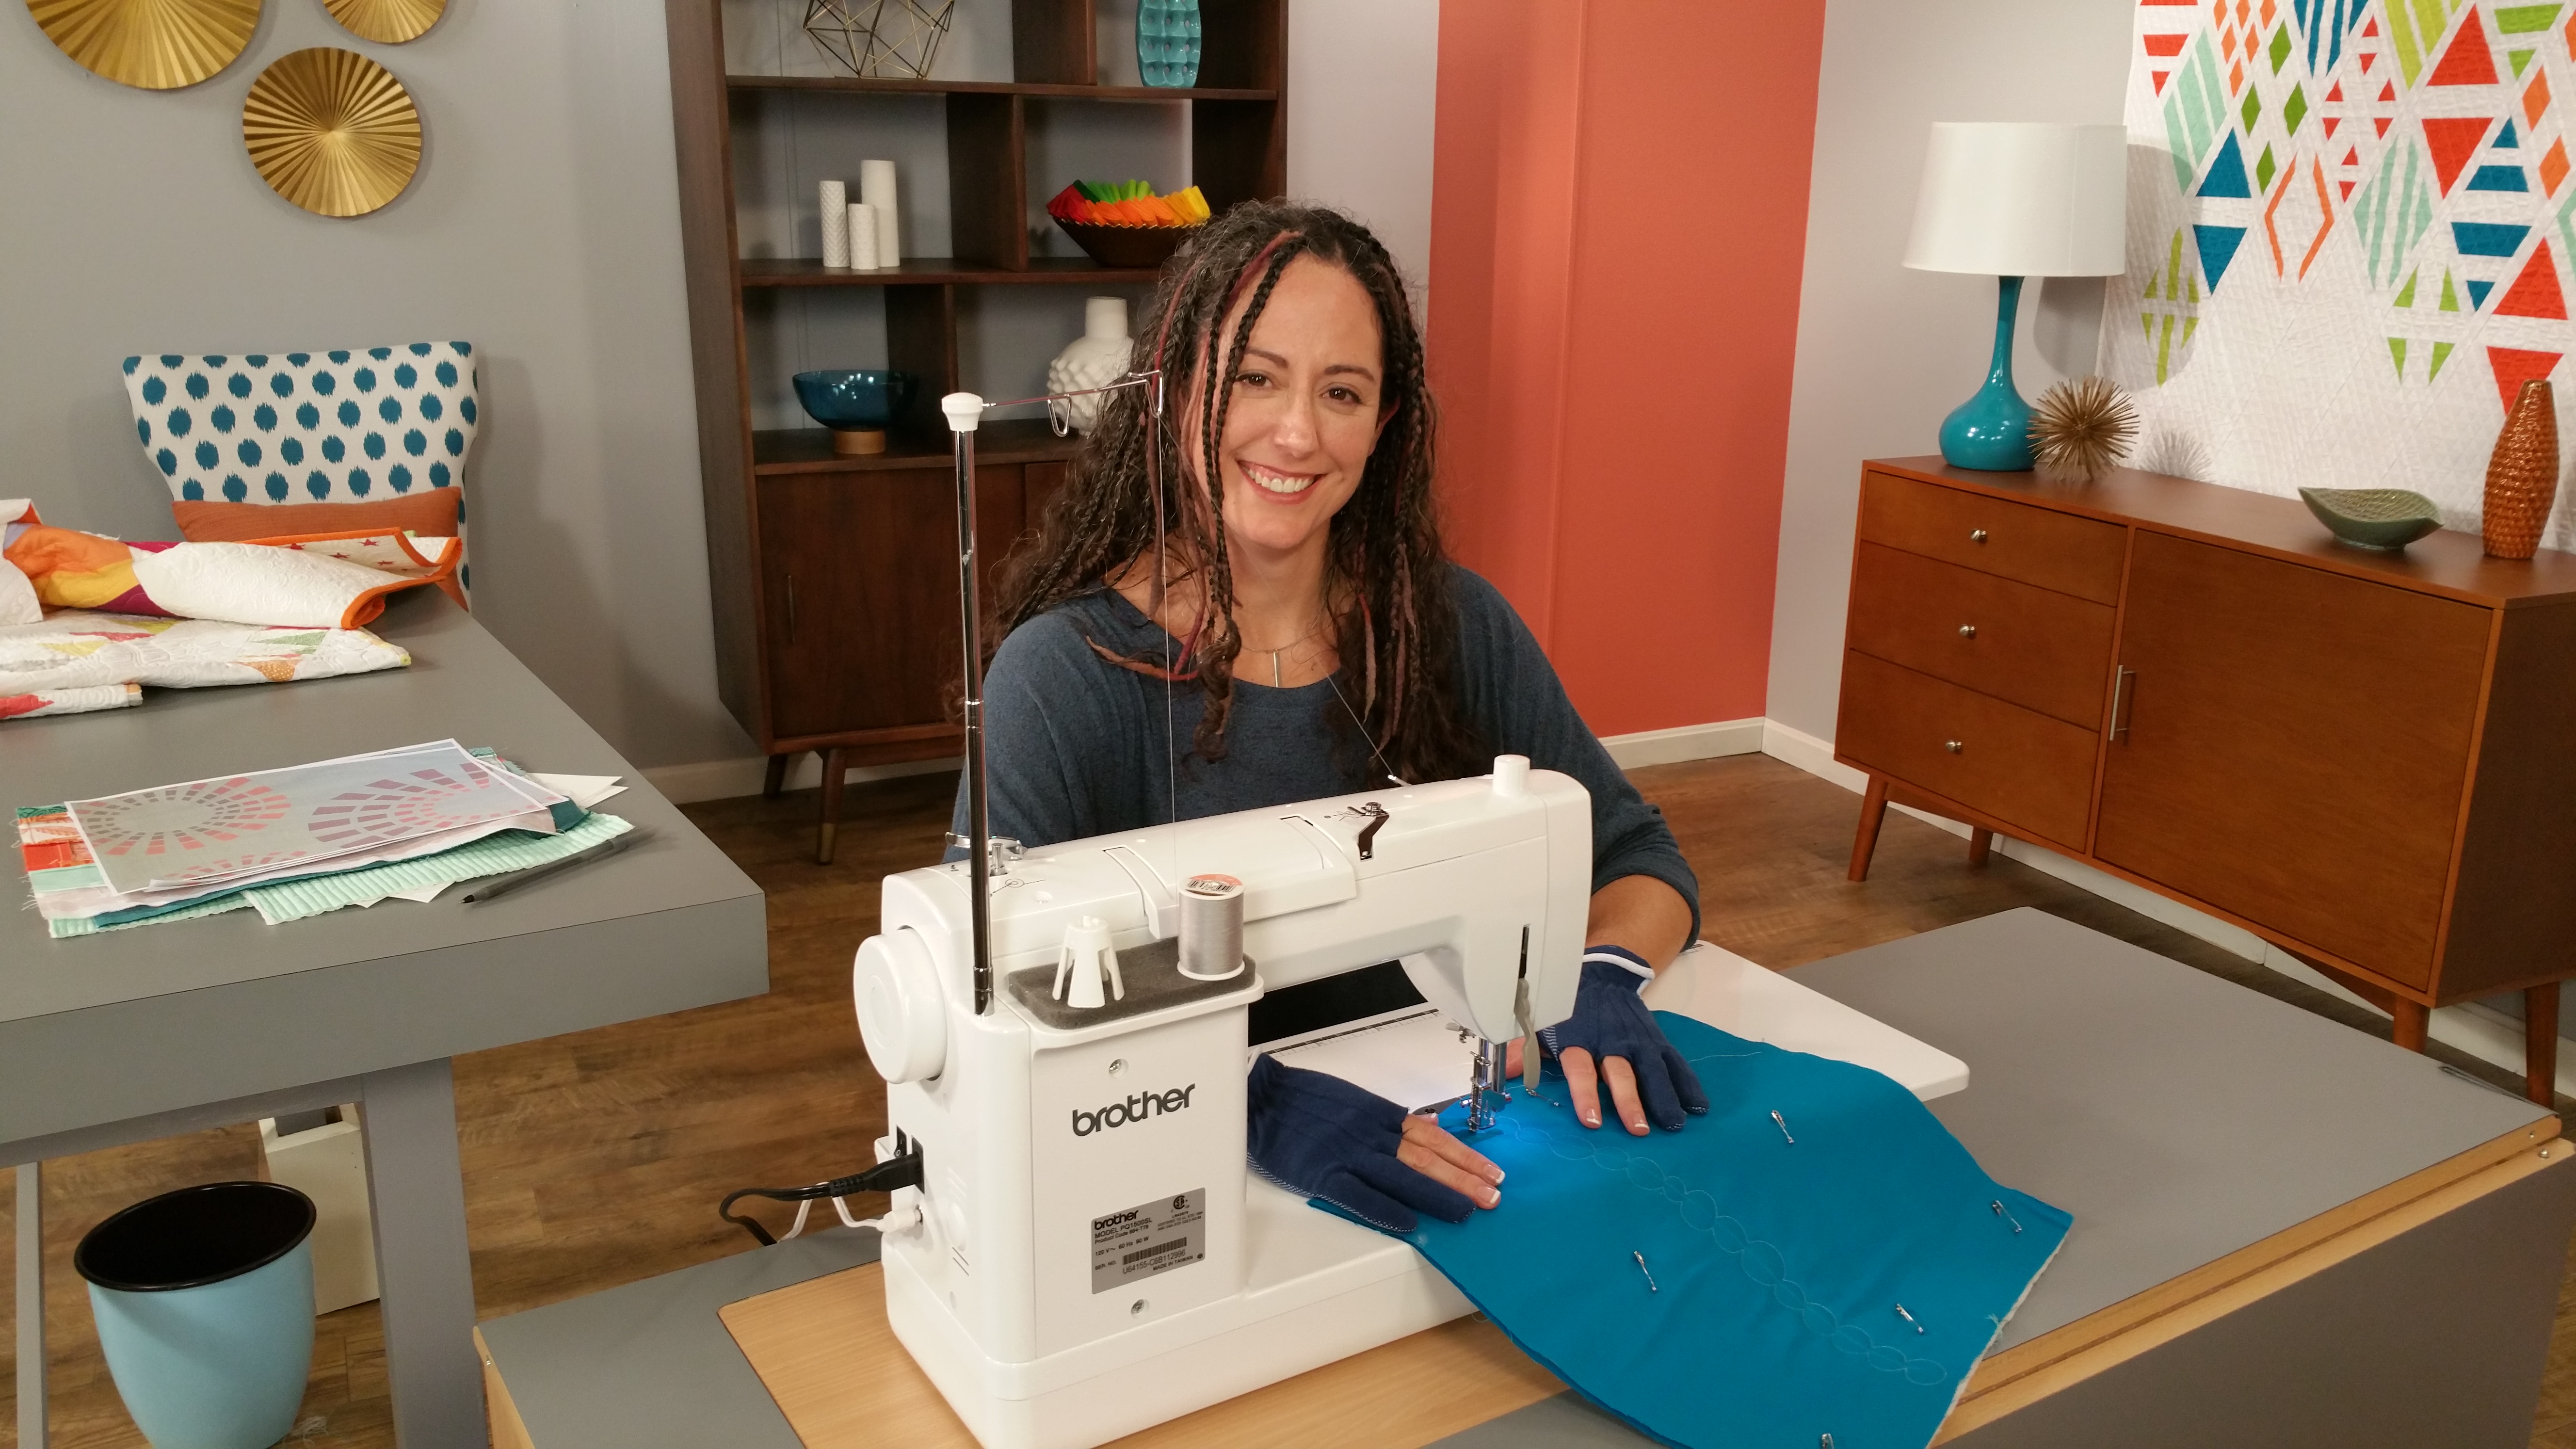 Step-by-Step Free-Motion Quilting by Christina Cameli